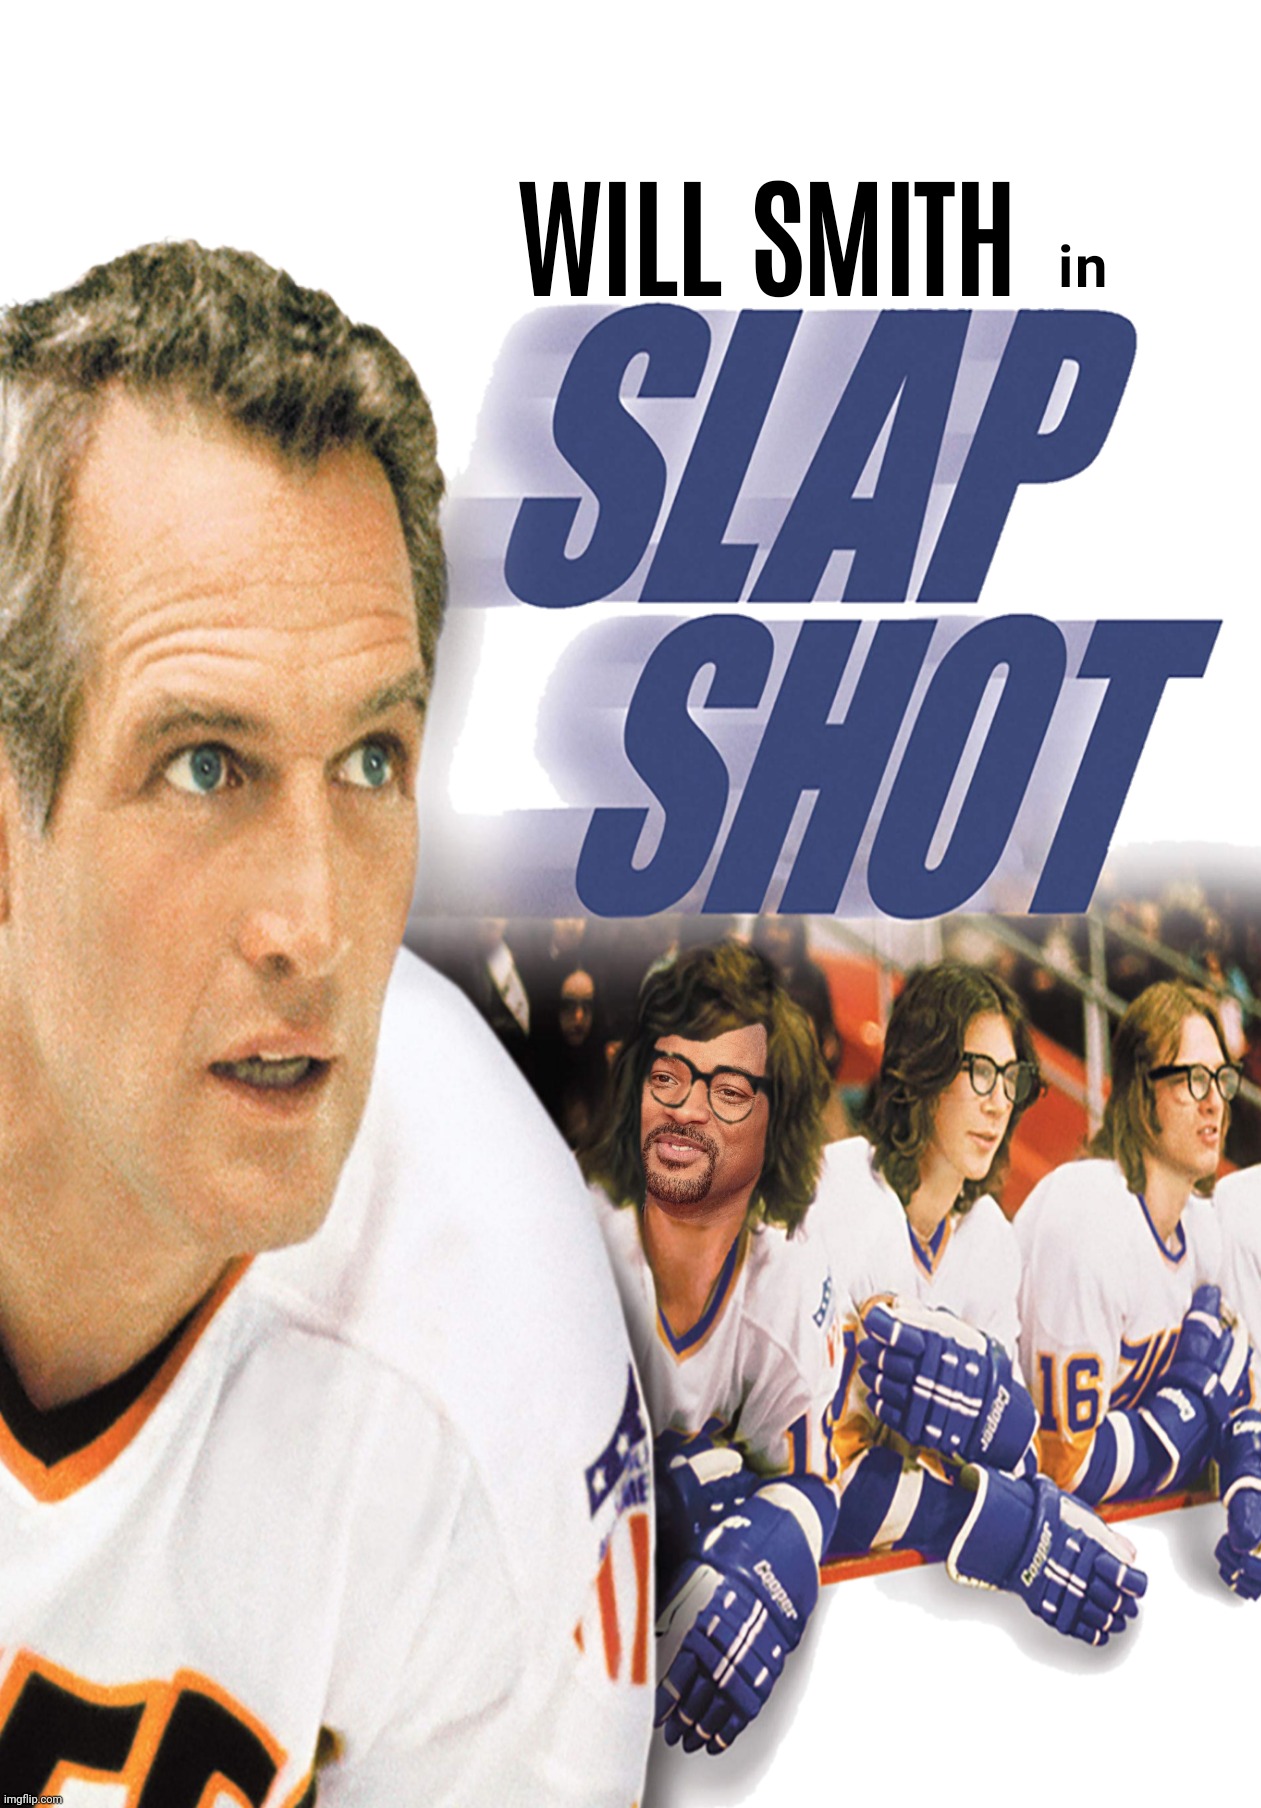 Bad Photoshop Sunday presents:  Keep your stick on the ice! | image tagged in bad photoshop sunday,will smith,slap shot,hanson brothers | made w/ Imgflip meme maker